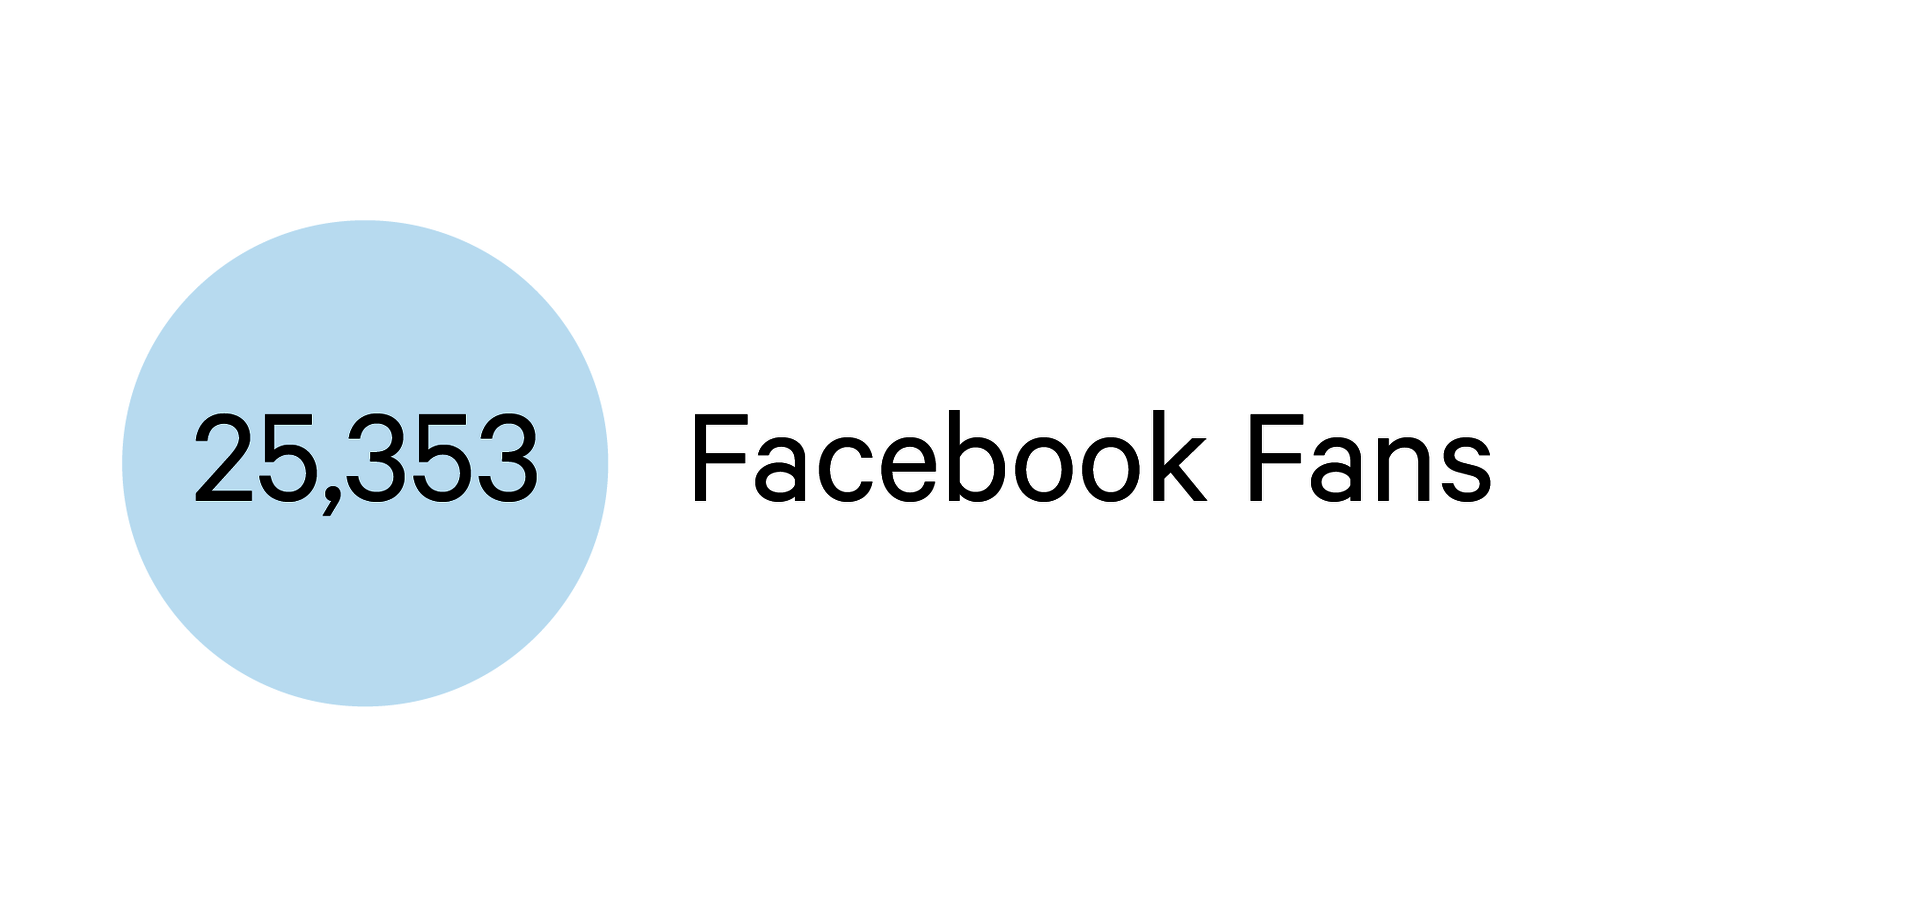 Pale blue circle with text that says: “25,353 Facebook Fans.”